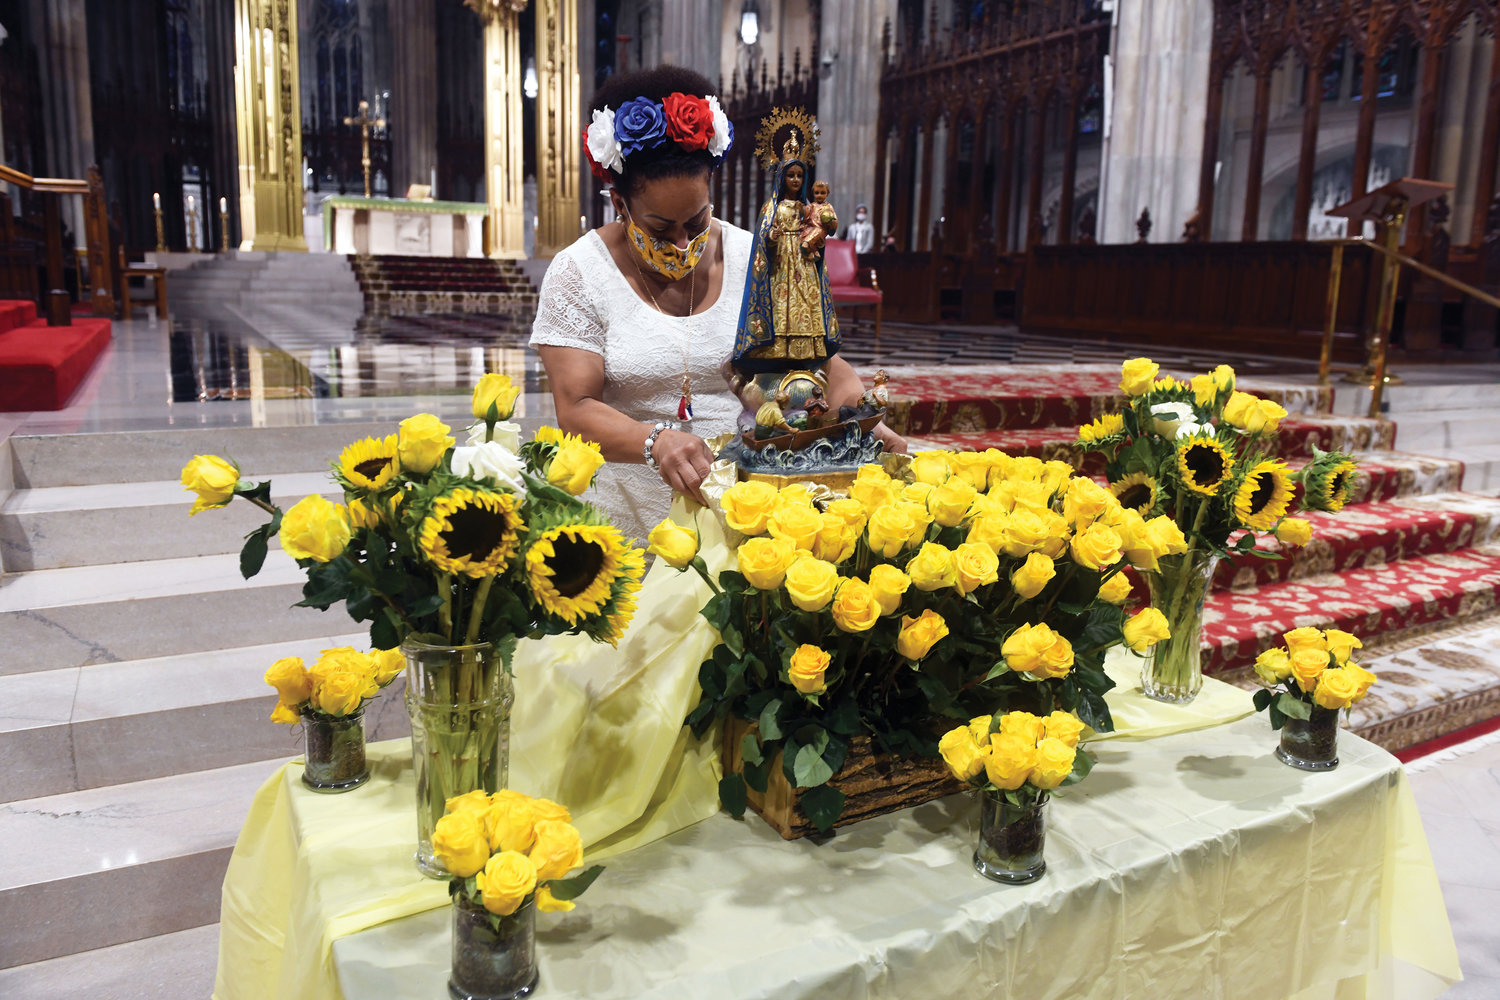 An organizer of the annual Our Lady of Charity del Cobre Mass prepares a floral and statue display before the Sept. 5 Mass at St. Patrick's Cathedral. Our Lady of Charity del Cobre is the patroness of Cuba. Story on page 3.